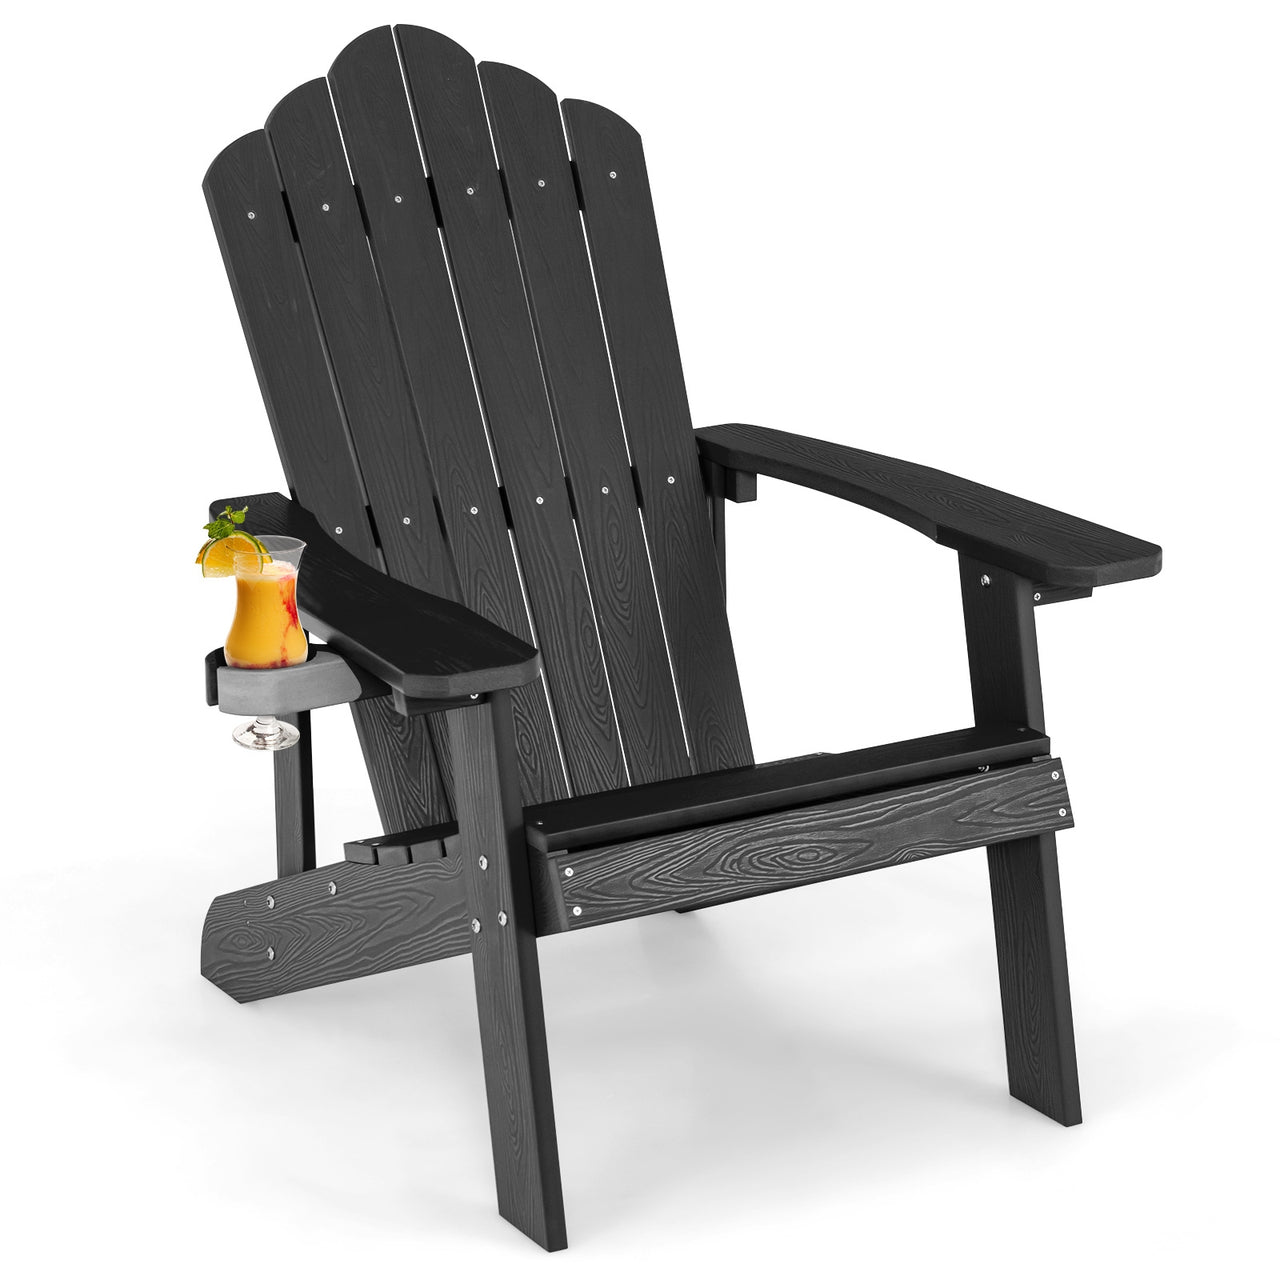 Weather Resistant HIPS Outdoor Adirondack Chair with Cup Holder - Gallery View 1 of 12